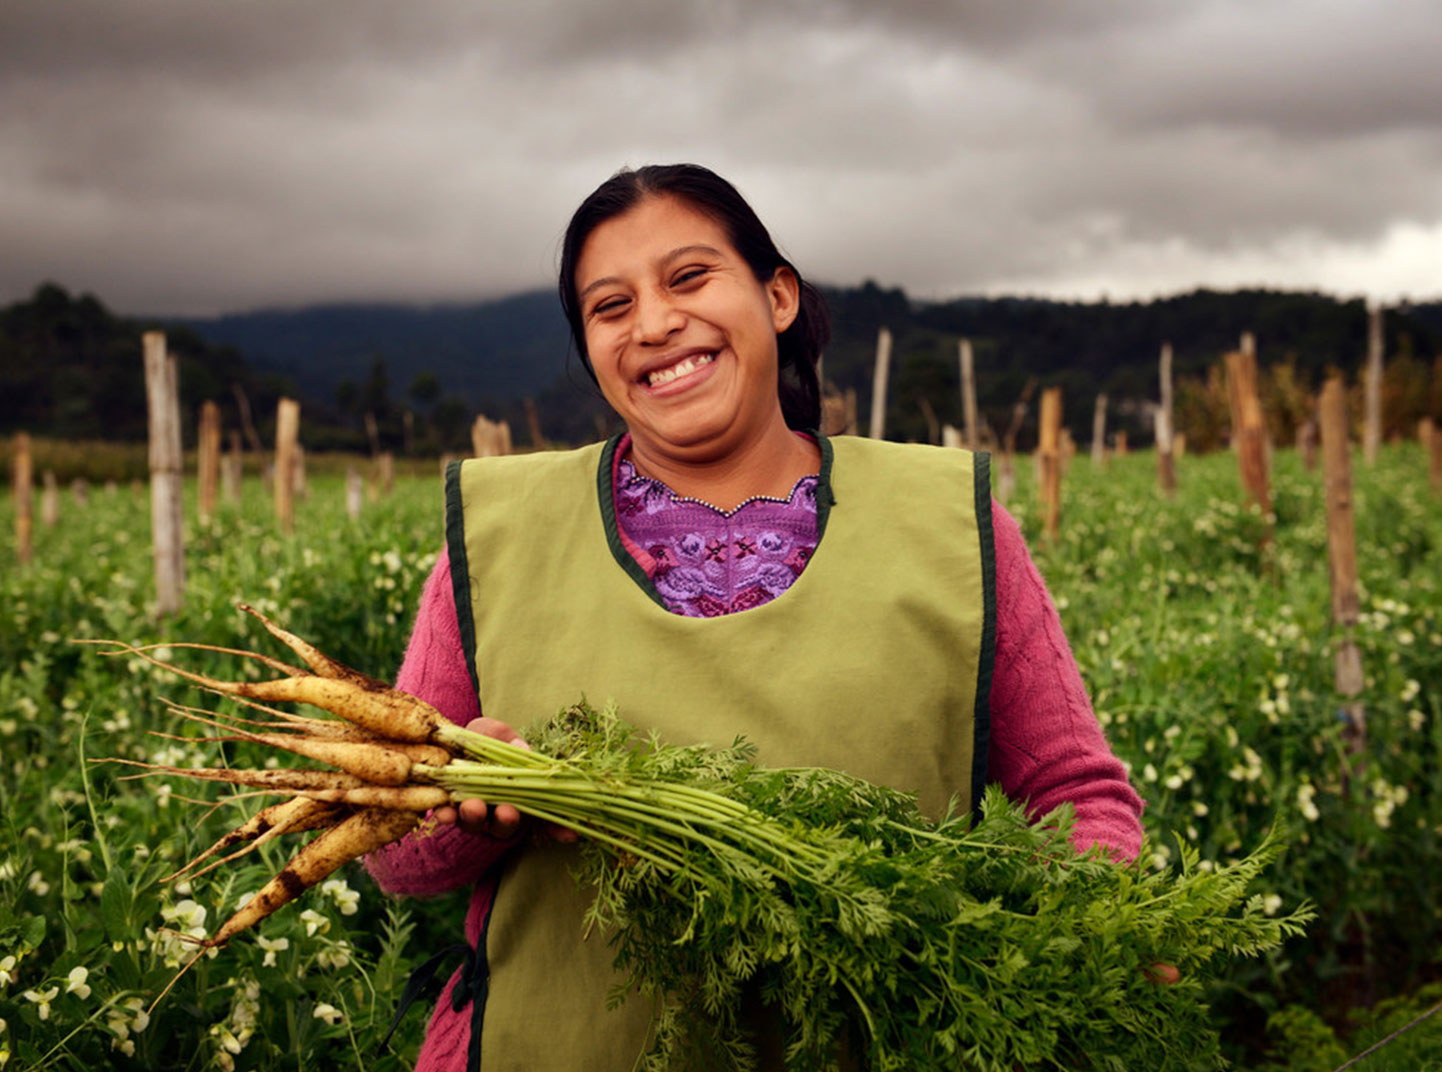 A woman stands in the middle of a large field and beams while showing off some carrots she's just pulled from her crop garden.